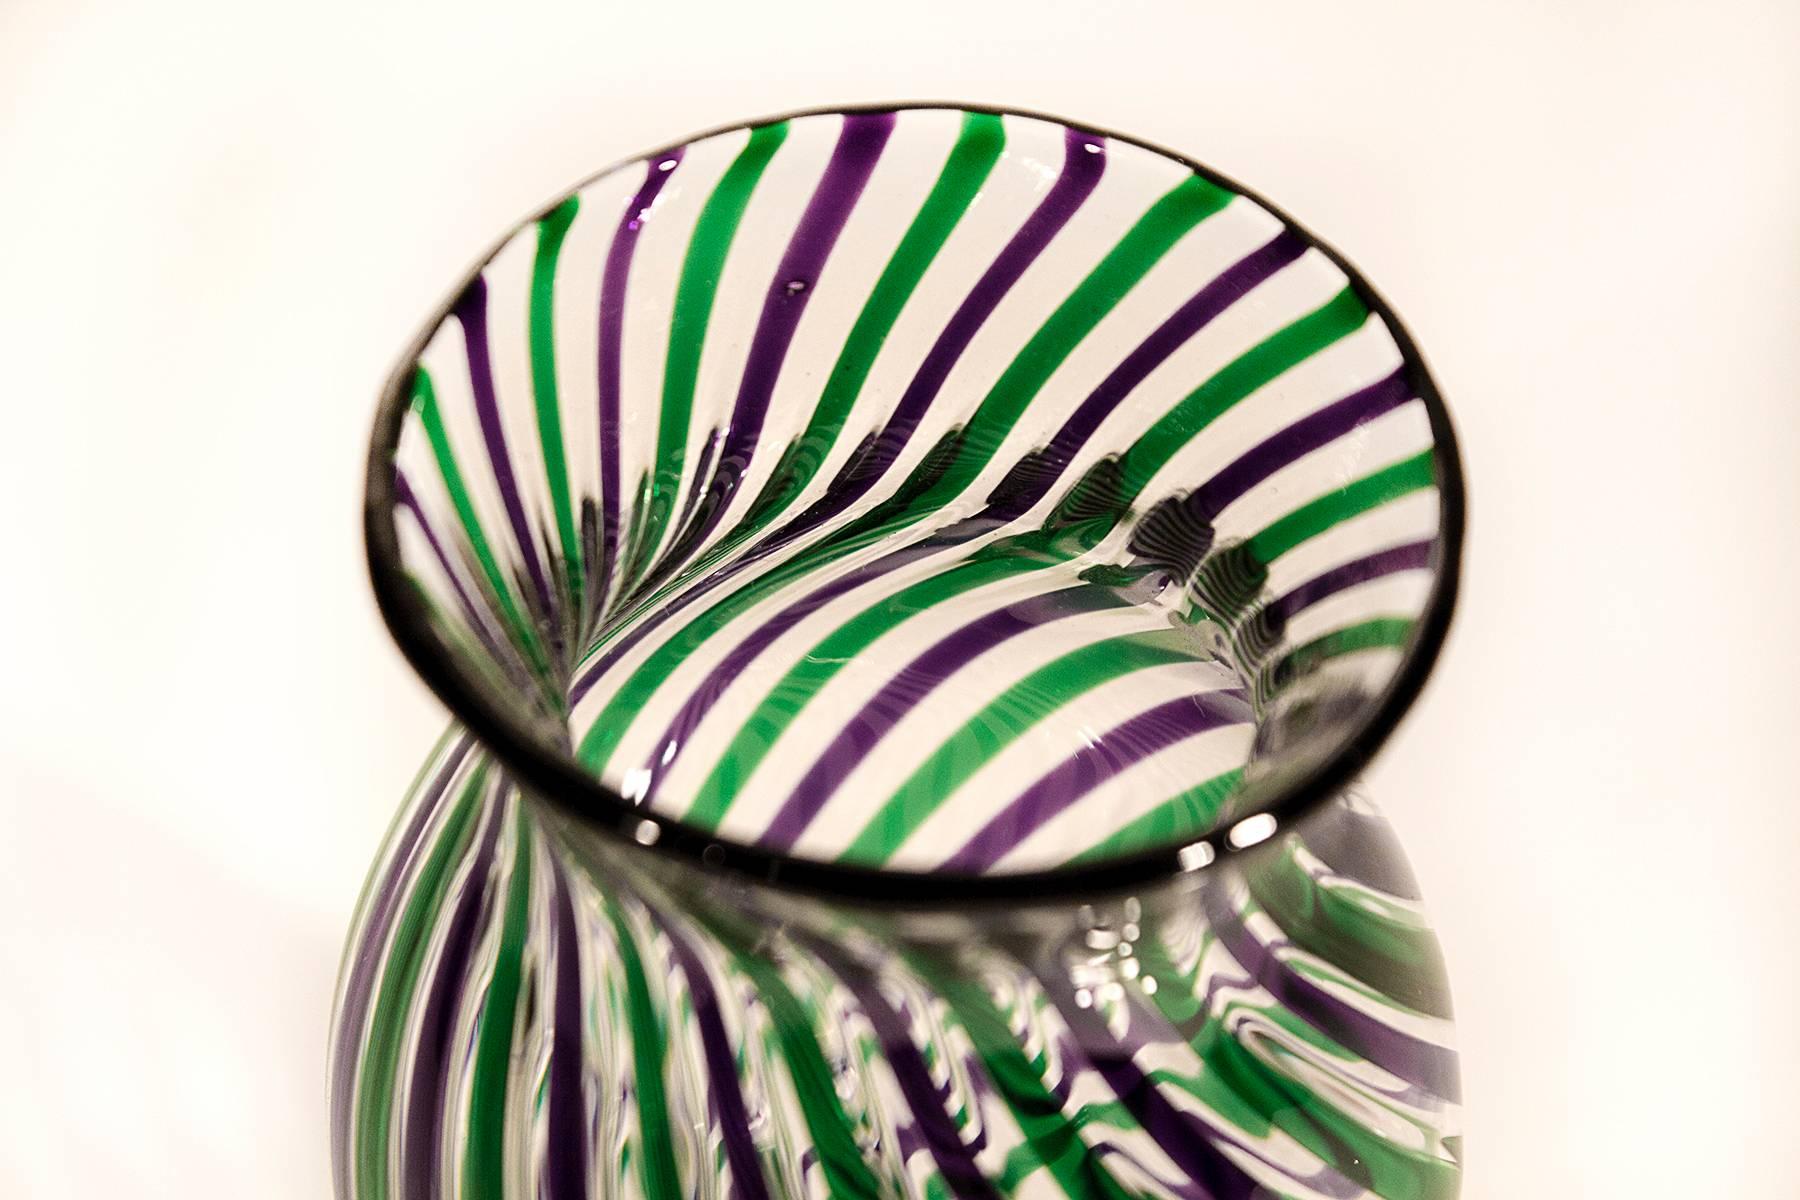 High quality green and purple ribbon fluted vase. Smooth around outside base and slightly textured along stripes at top. Thin glass is expertly crafted. A must have for any serious art glass collector. Illegible signature. Date 2010. 
Measures: 3